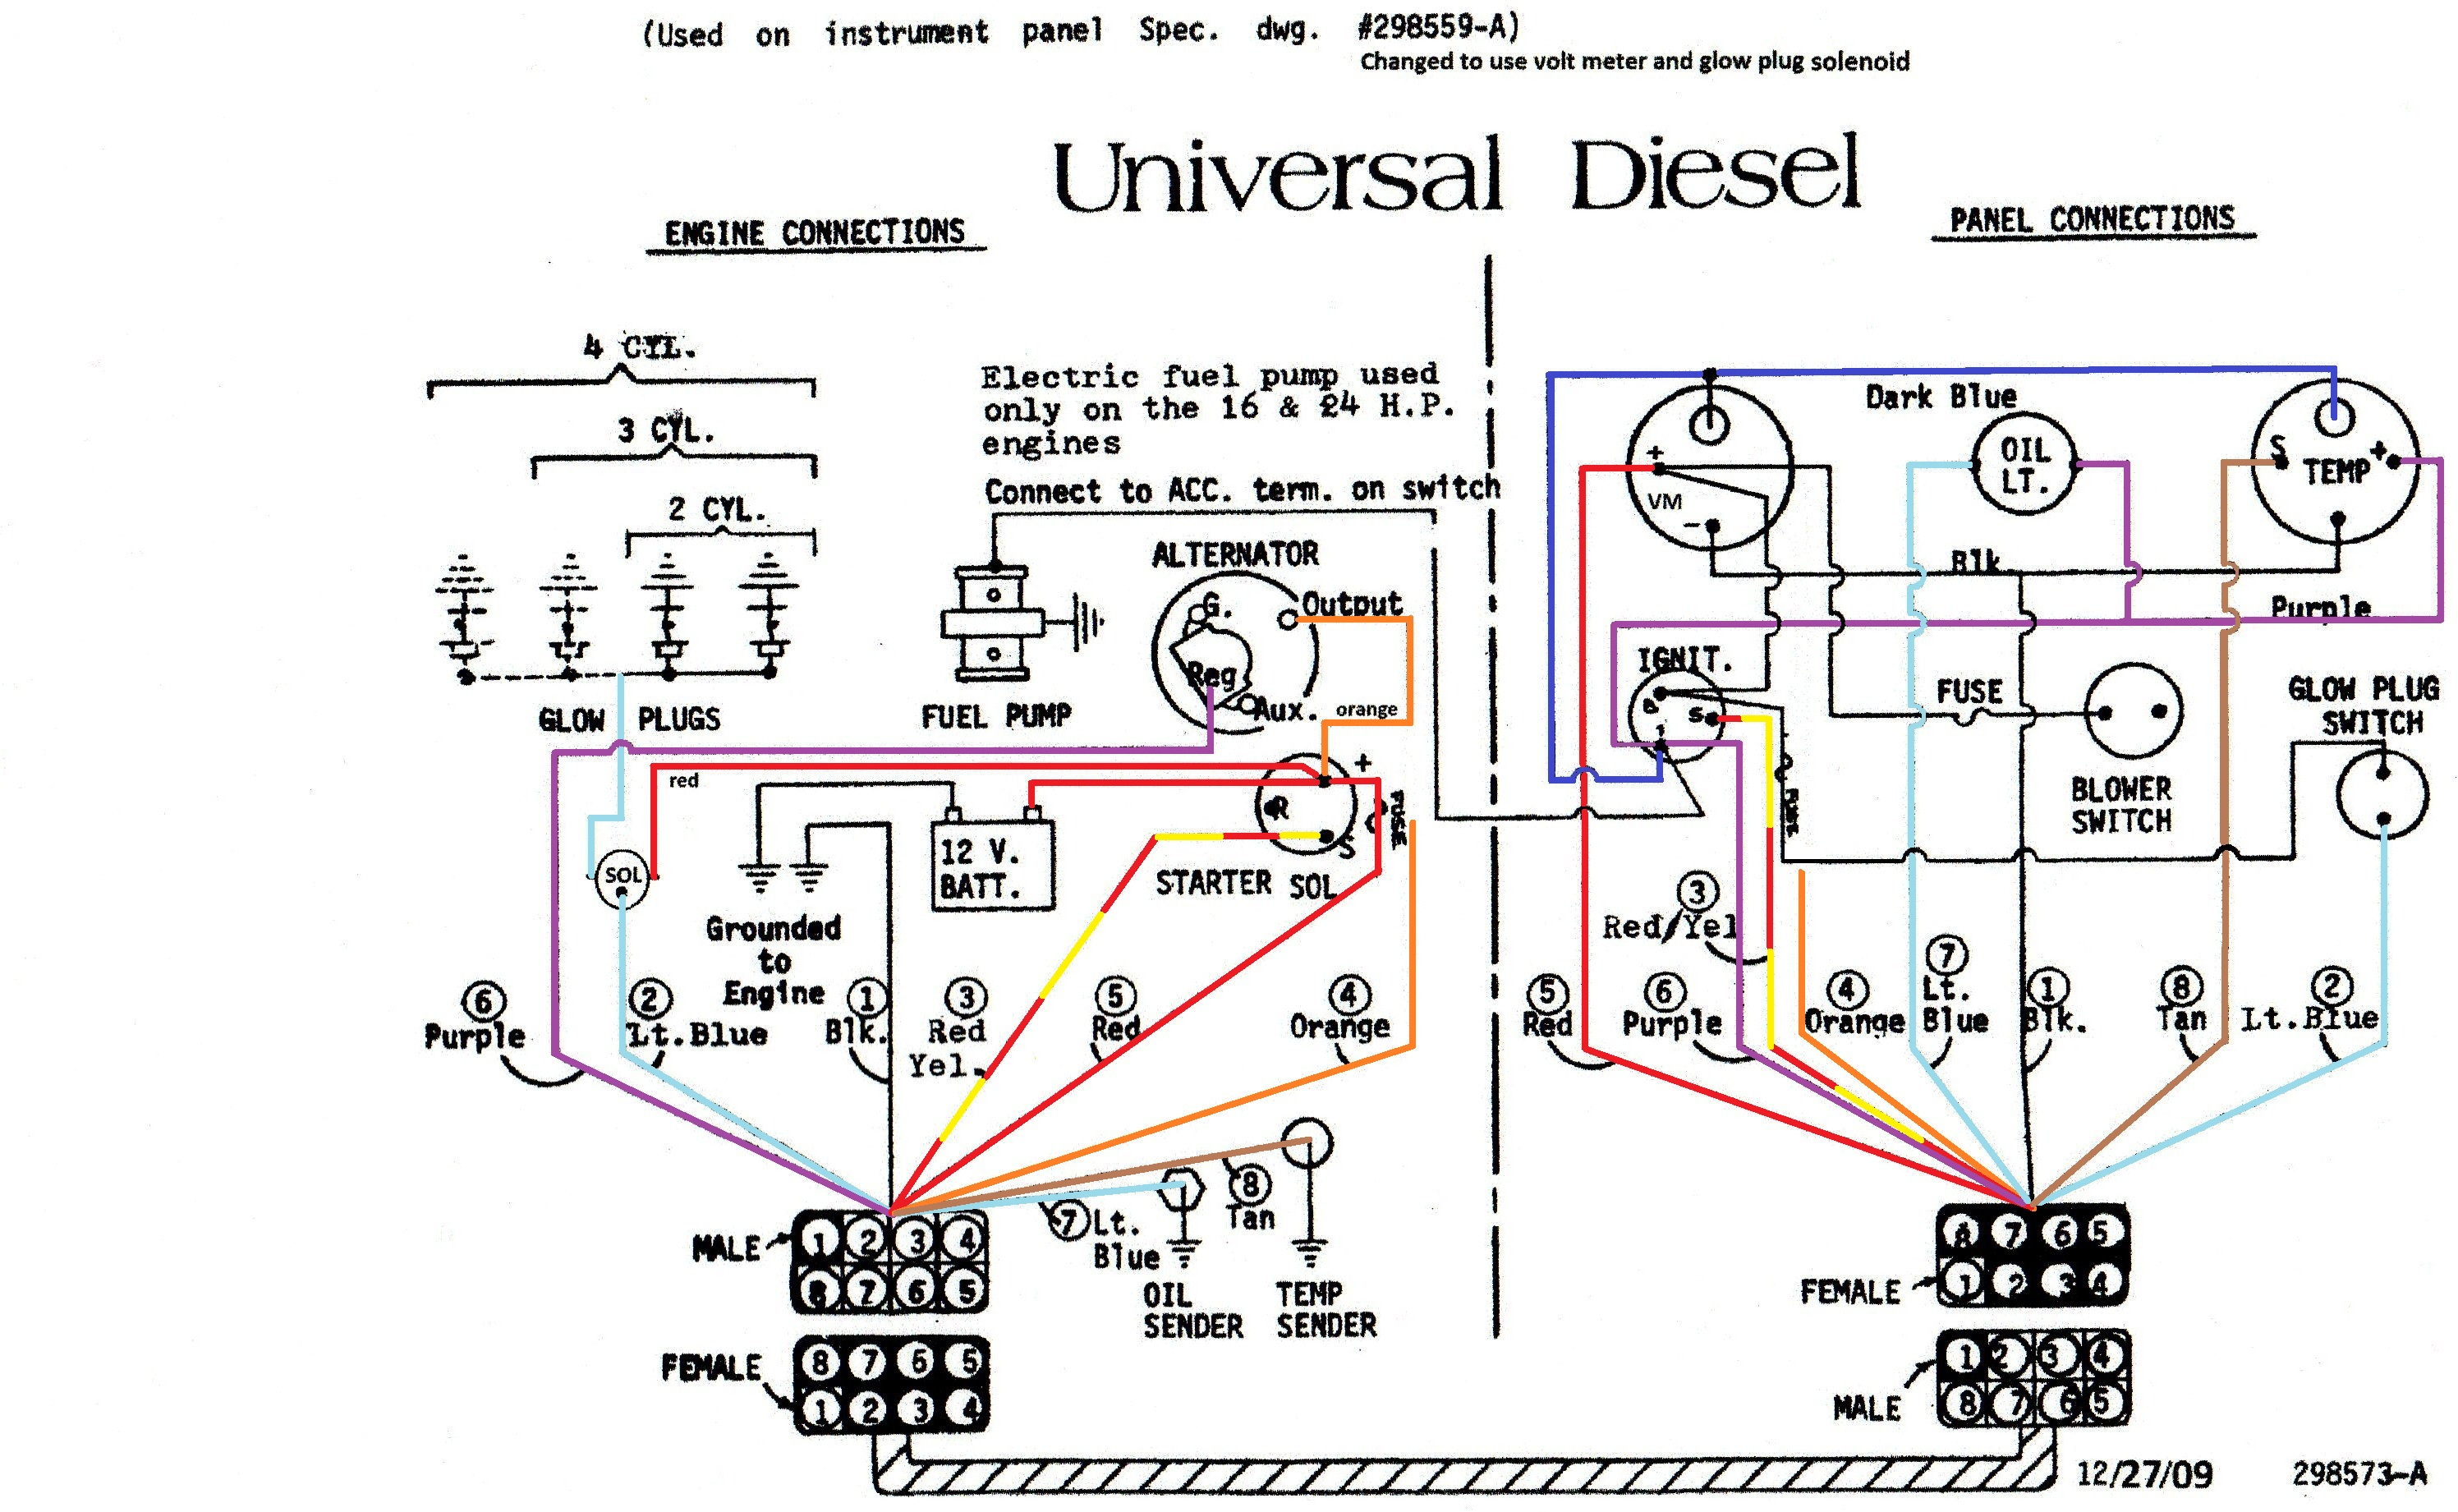 Wire Harness Diagram - Wiring Diagrams Hubs - Wiring Harness Diagram